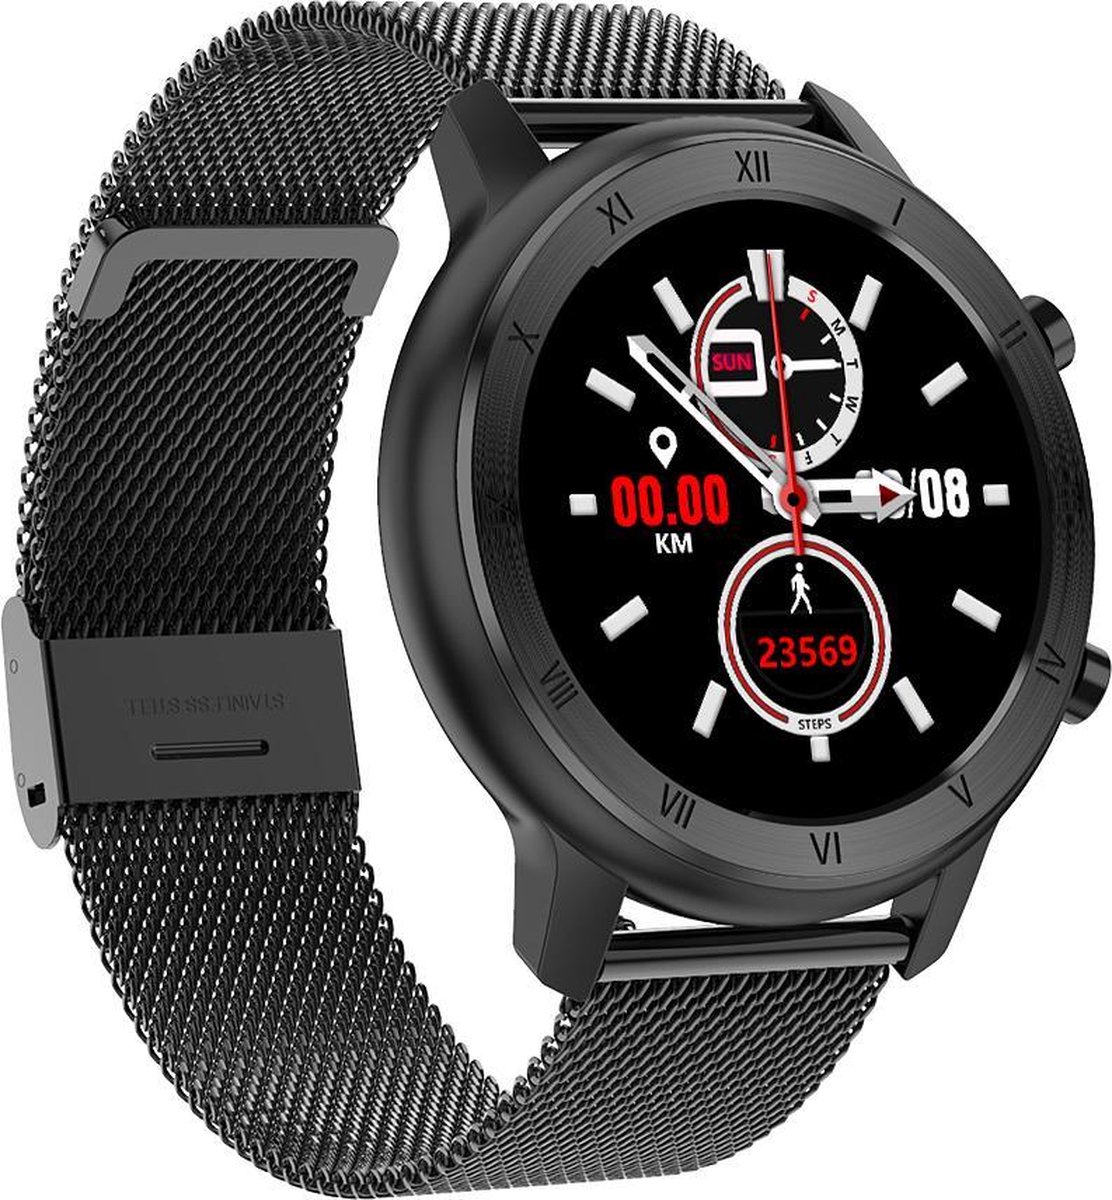 Discount on Smartwatches: Features the Latest Amazfit GTR & More